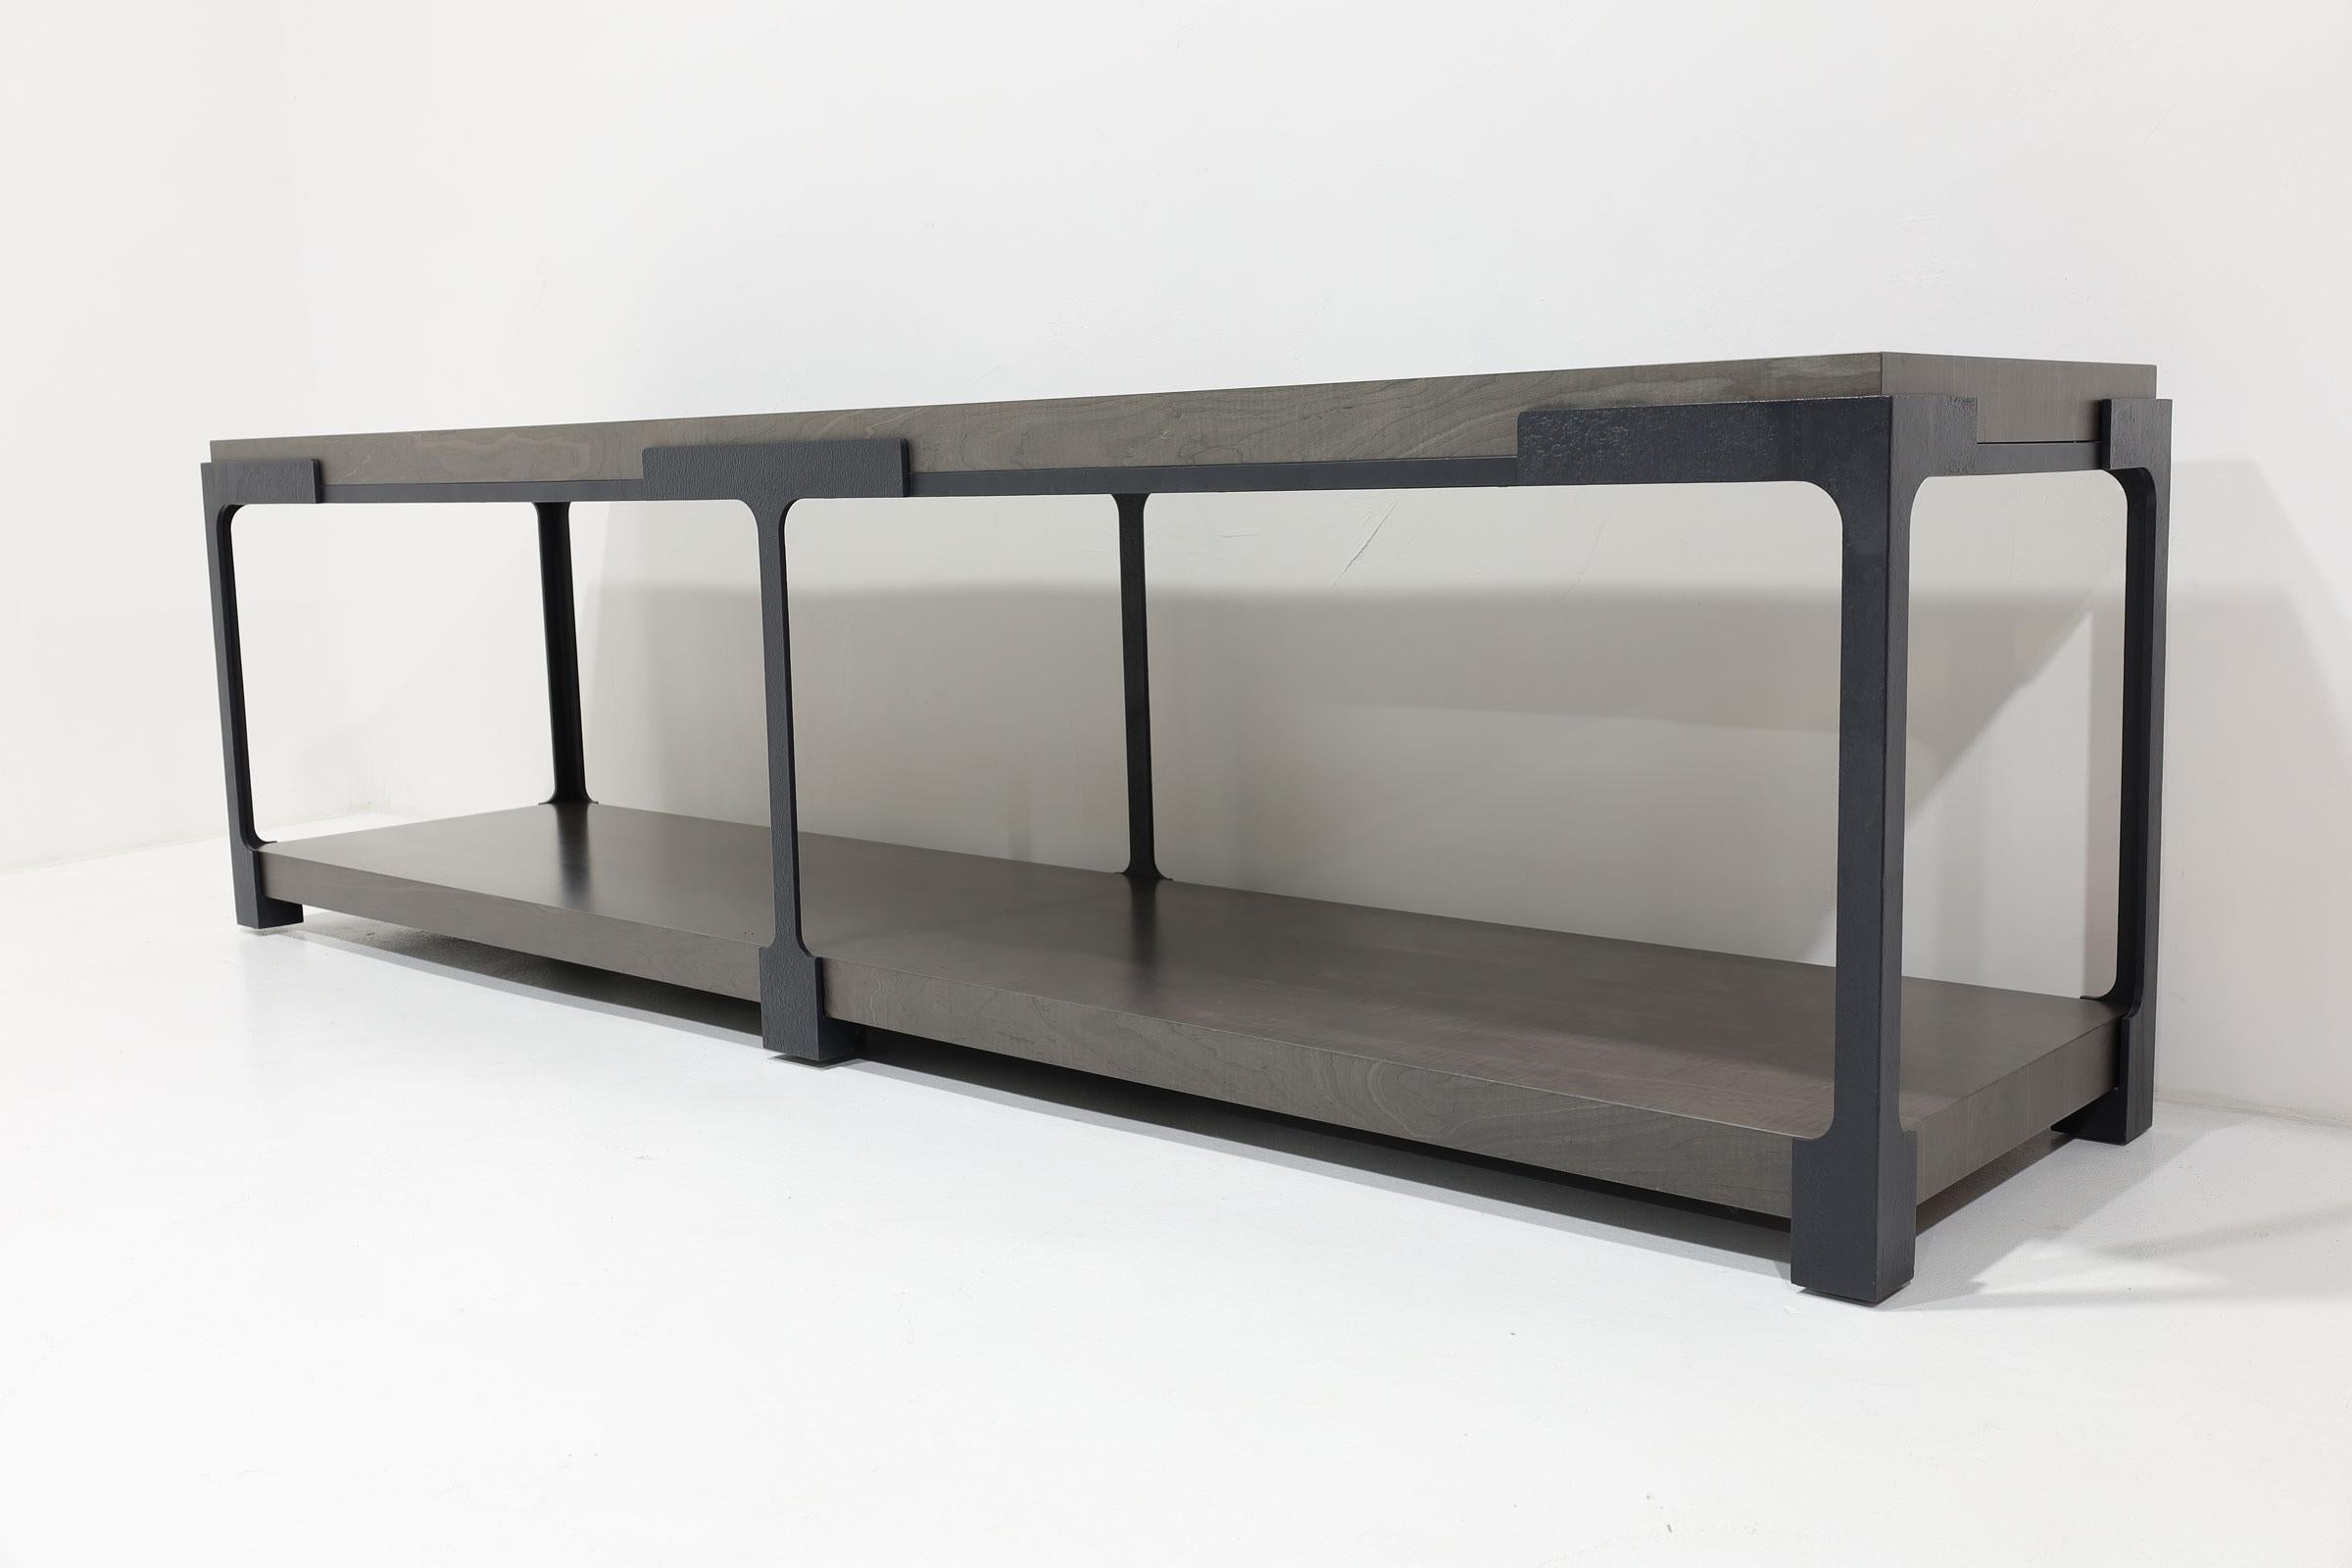 Elegant console by Holly Hunt. Highest quality. This one is a custom design in hand forged iron with a stained ash top. Standard size is 78